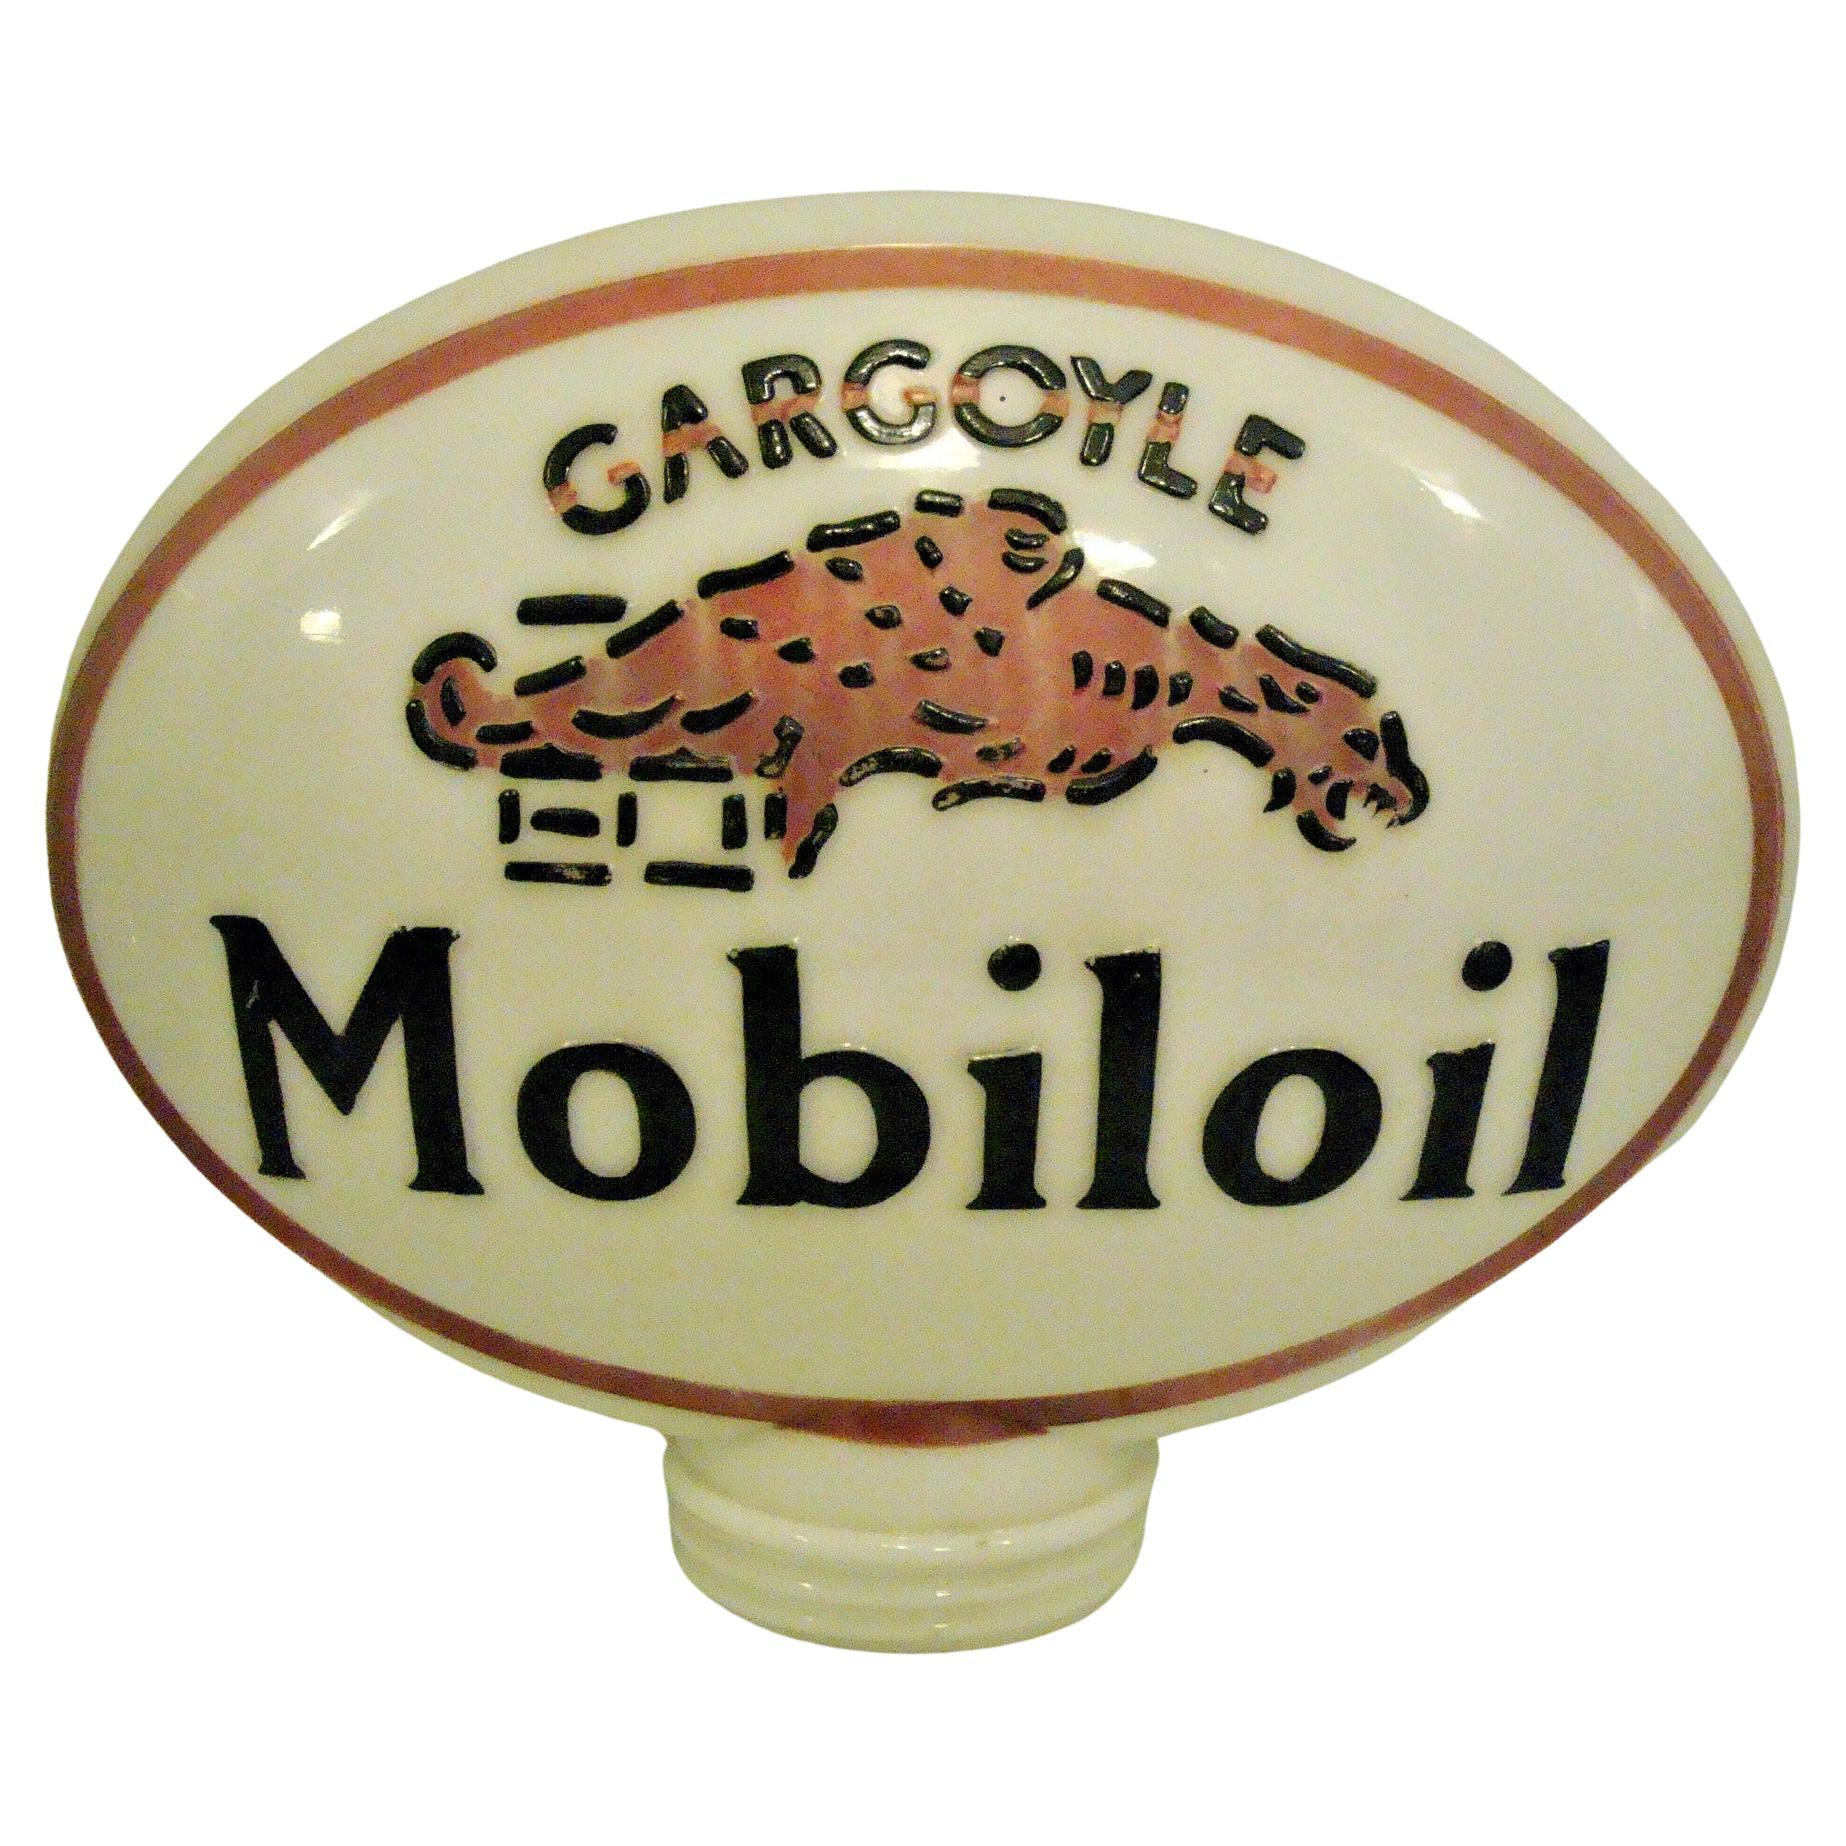 Gargoyle Moboloil Gas Pump Globe, Double Sided, with raised letter and logo For Sale